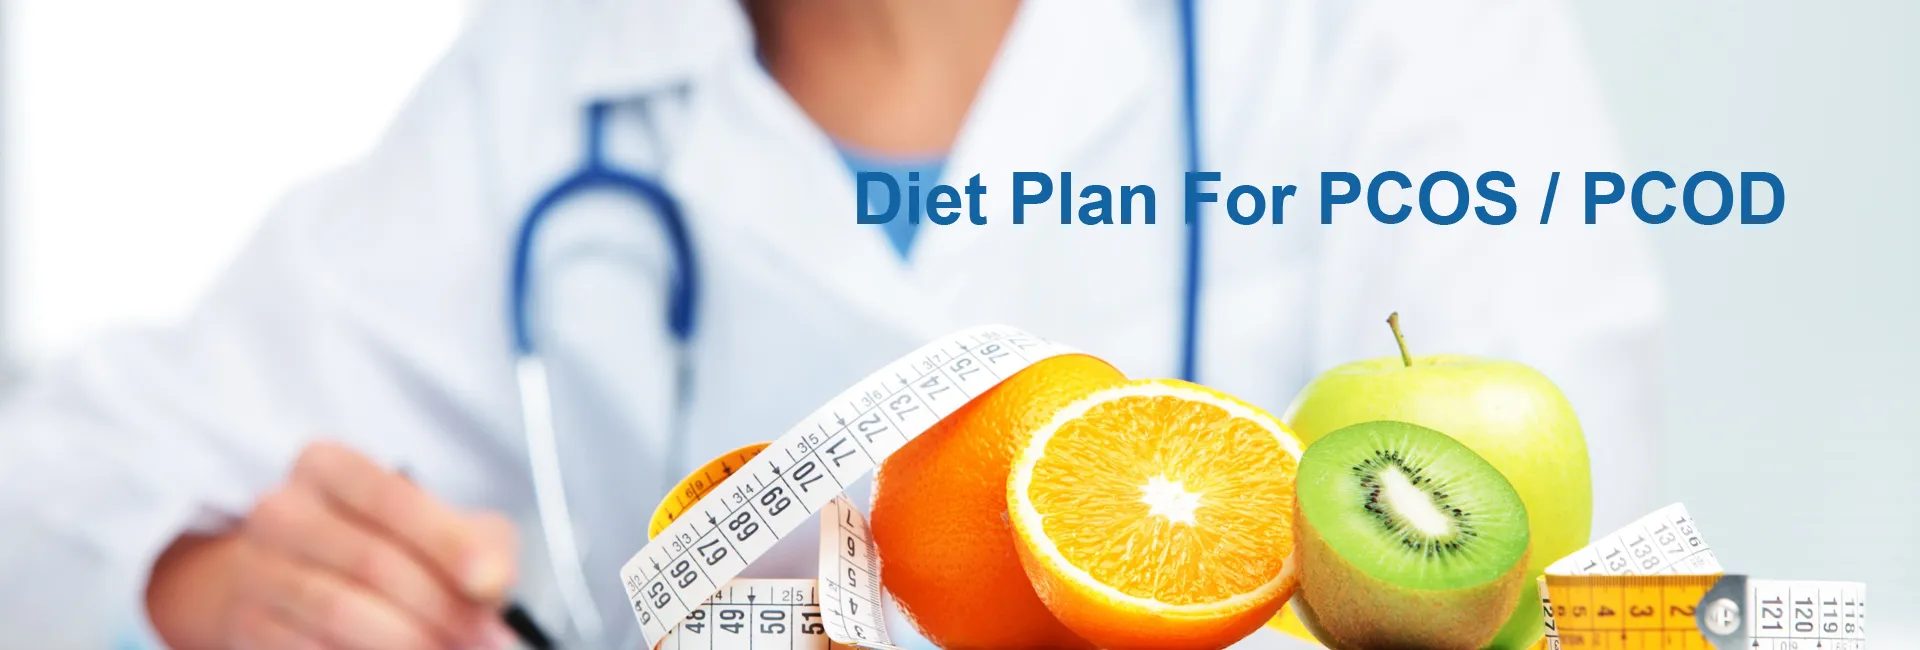 Diet Plan For PCOS / PCOD In Ruwais